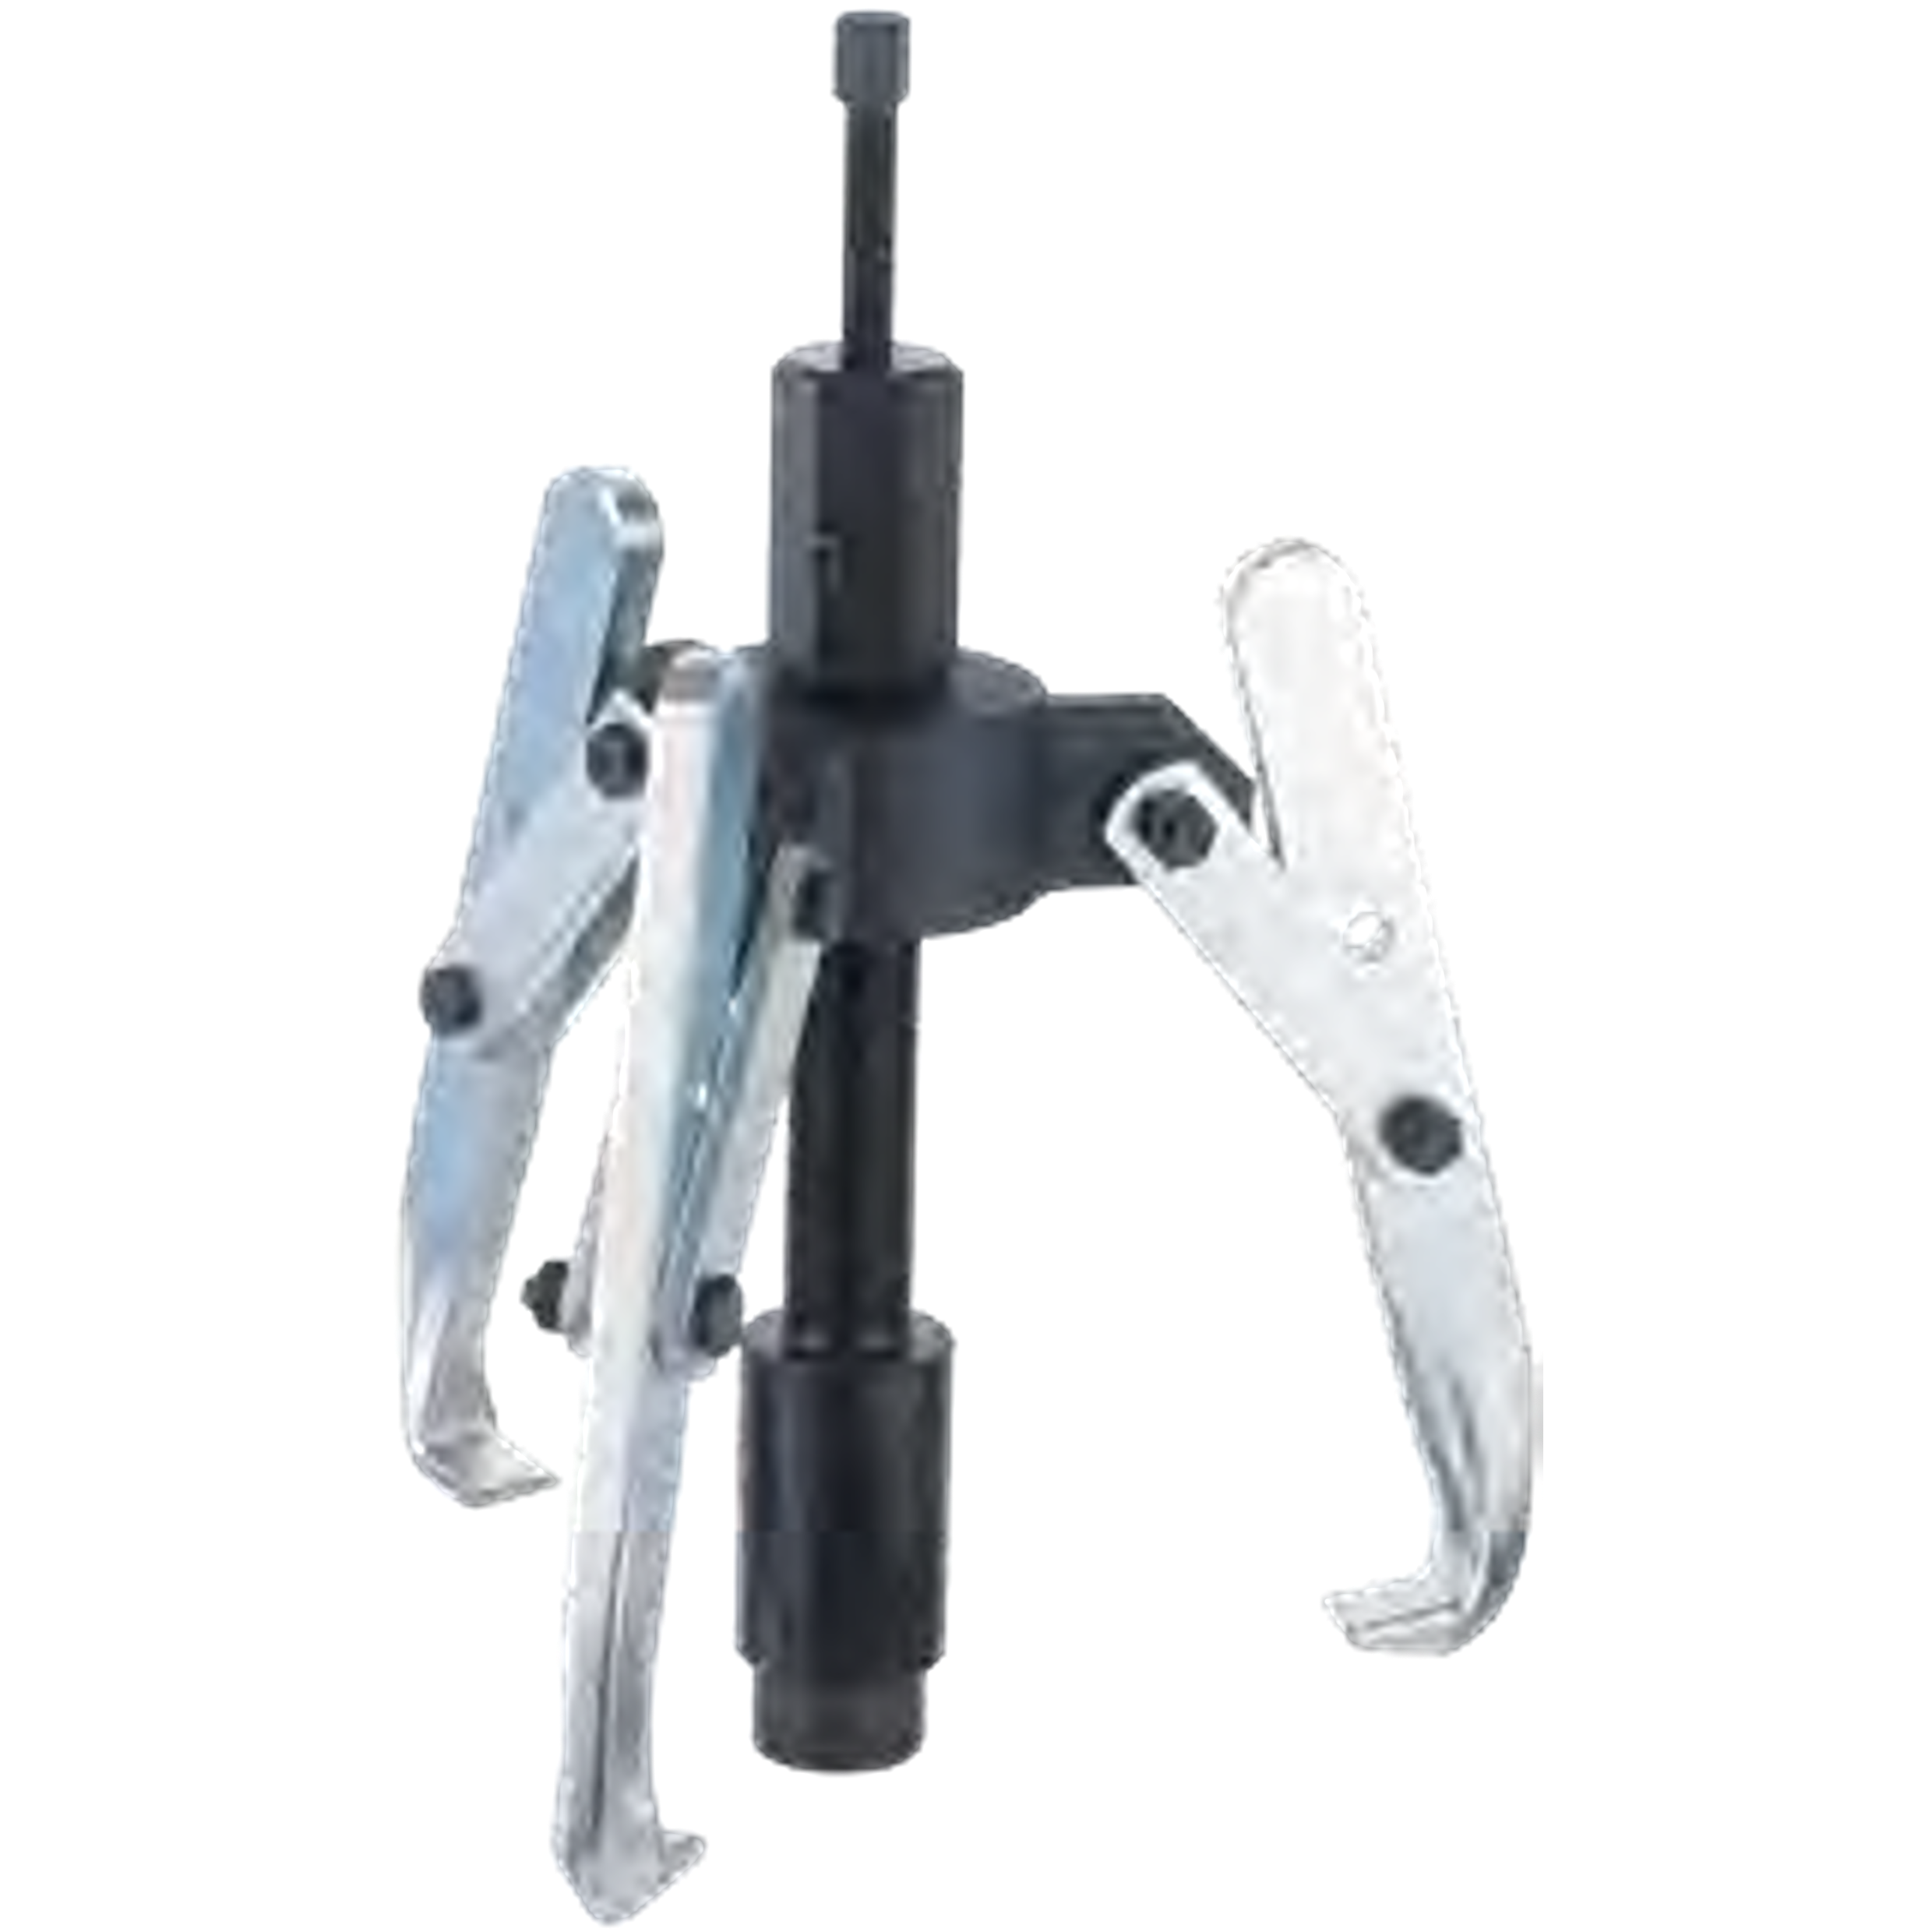 NEXUS 136-LH Puller Legs - Premium Grease Hydraulic Pullers from NEXUS - Shop now at Yew Aik.